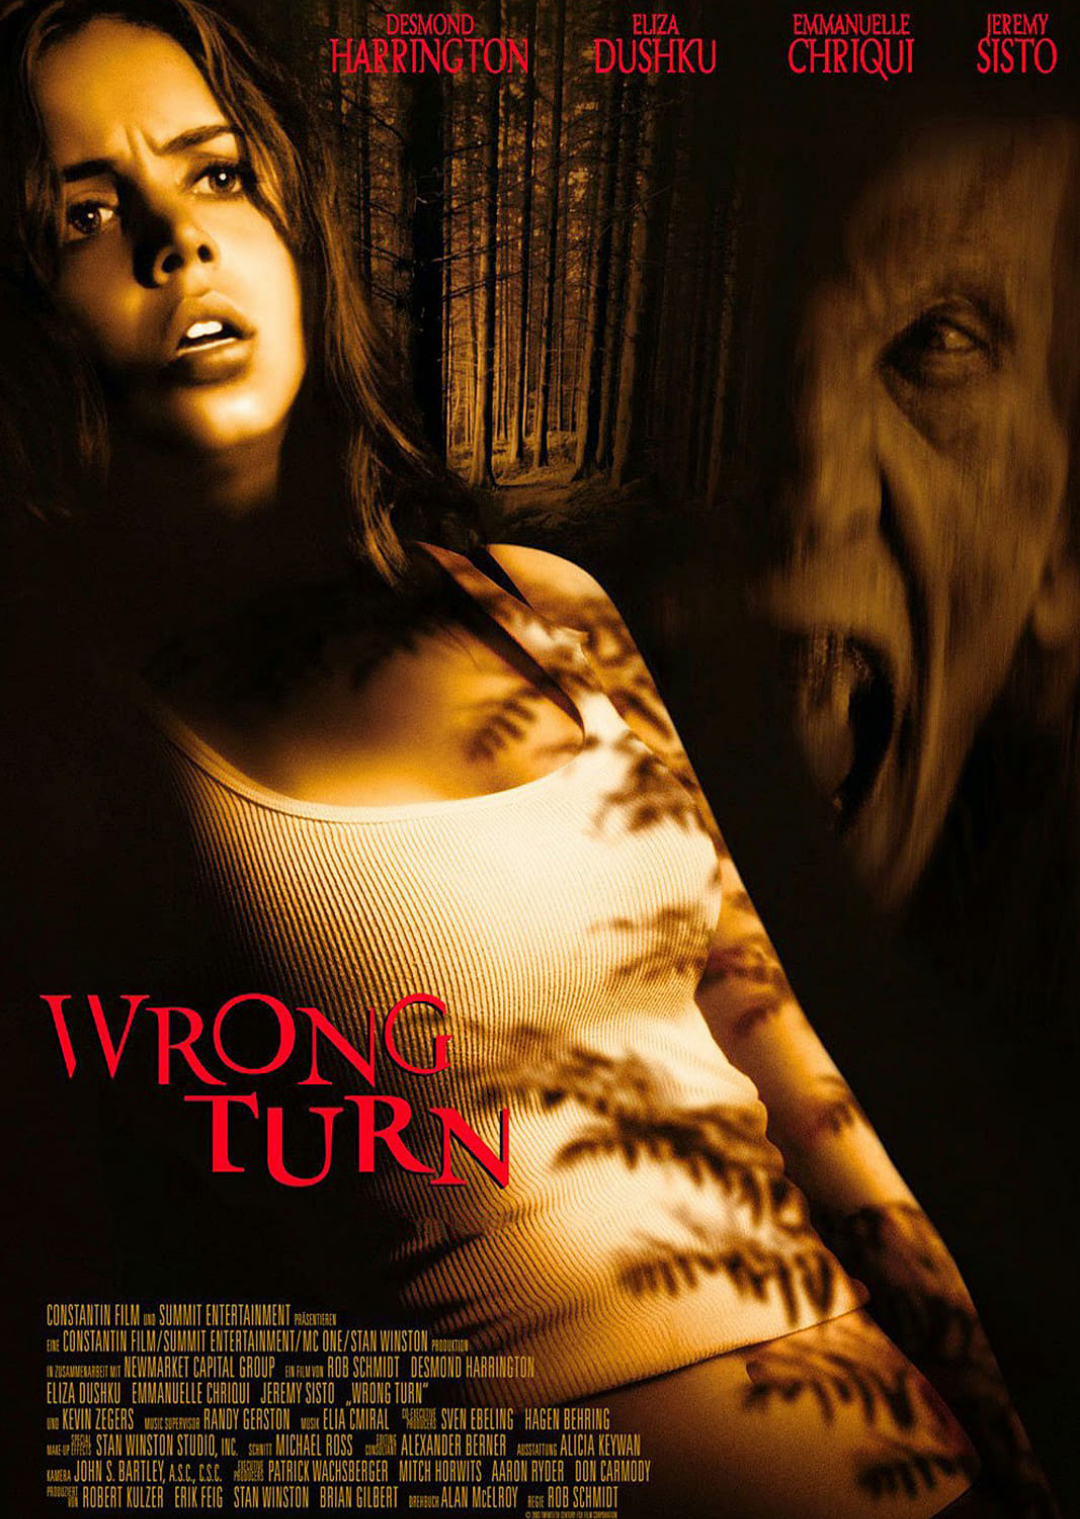 the wrong turn 2 full movie